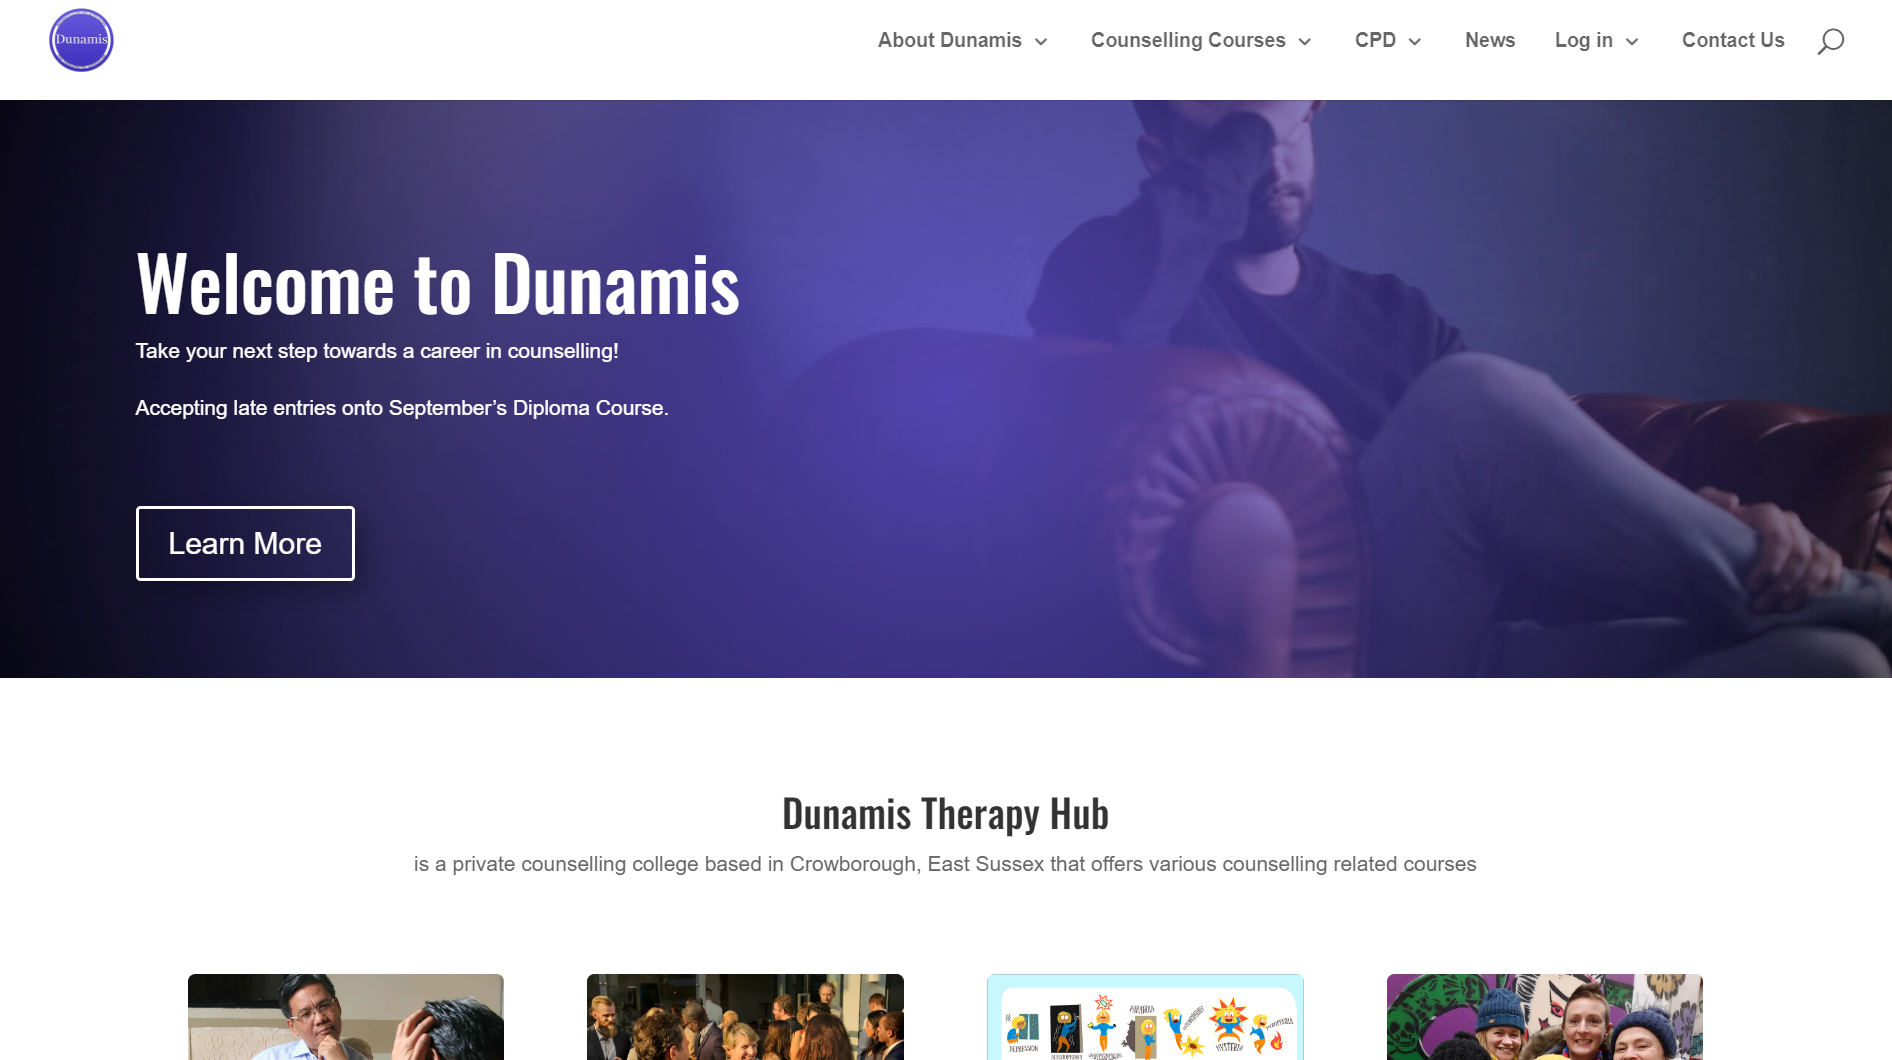 Dunamis Therapy Hub website designed by Daily Bread Consultancy